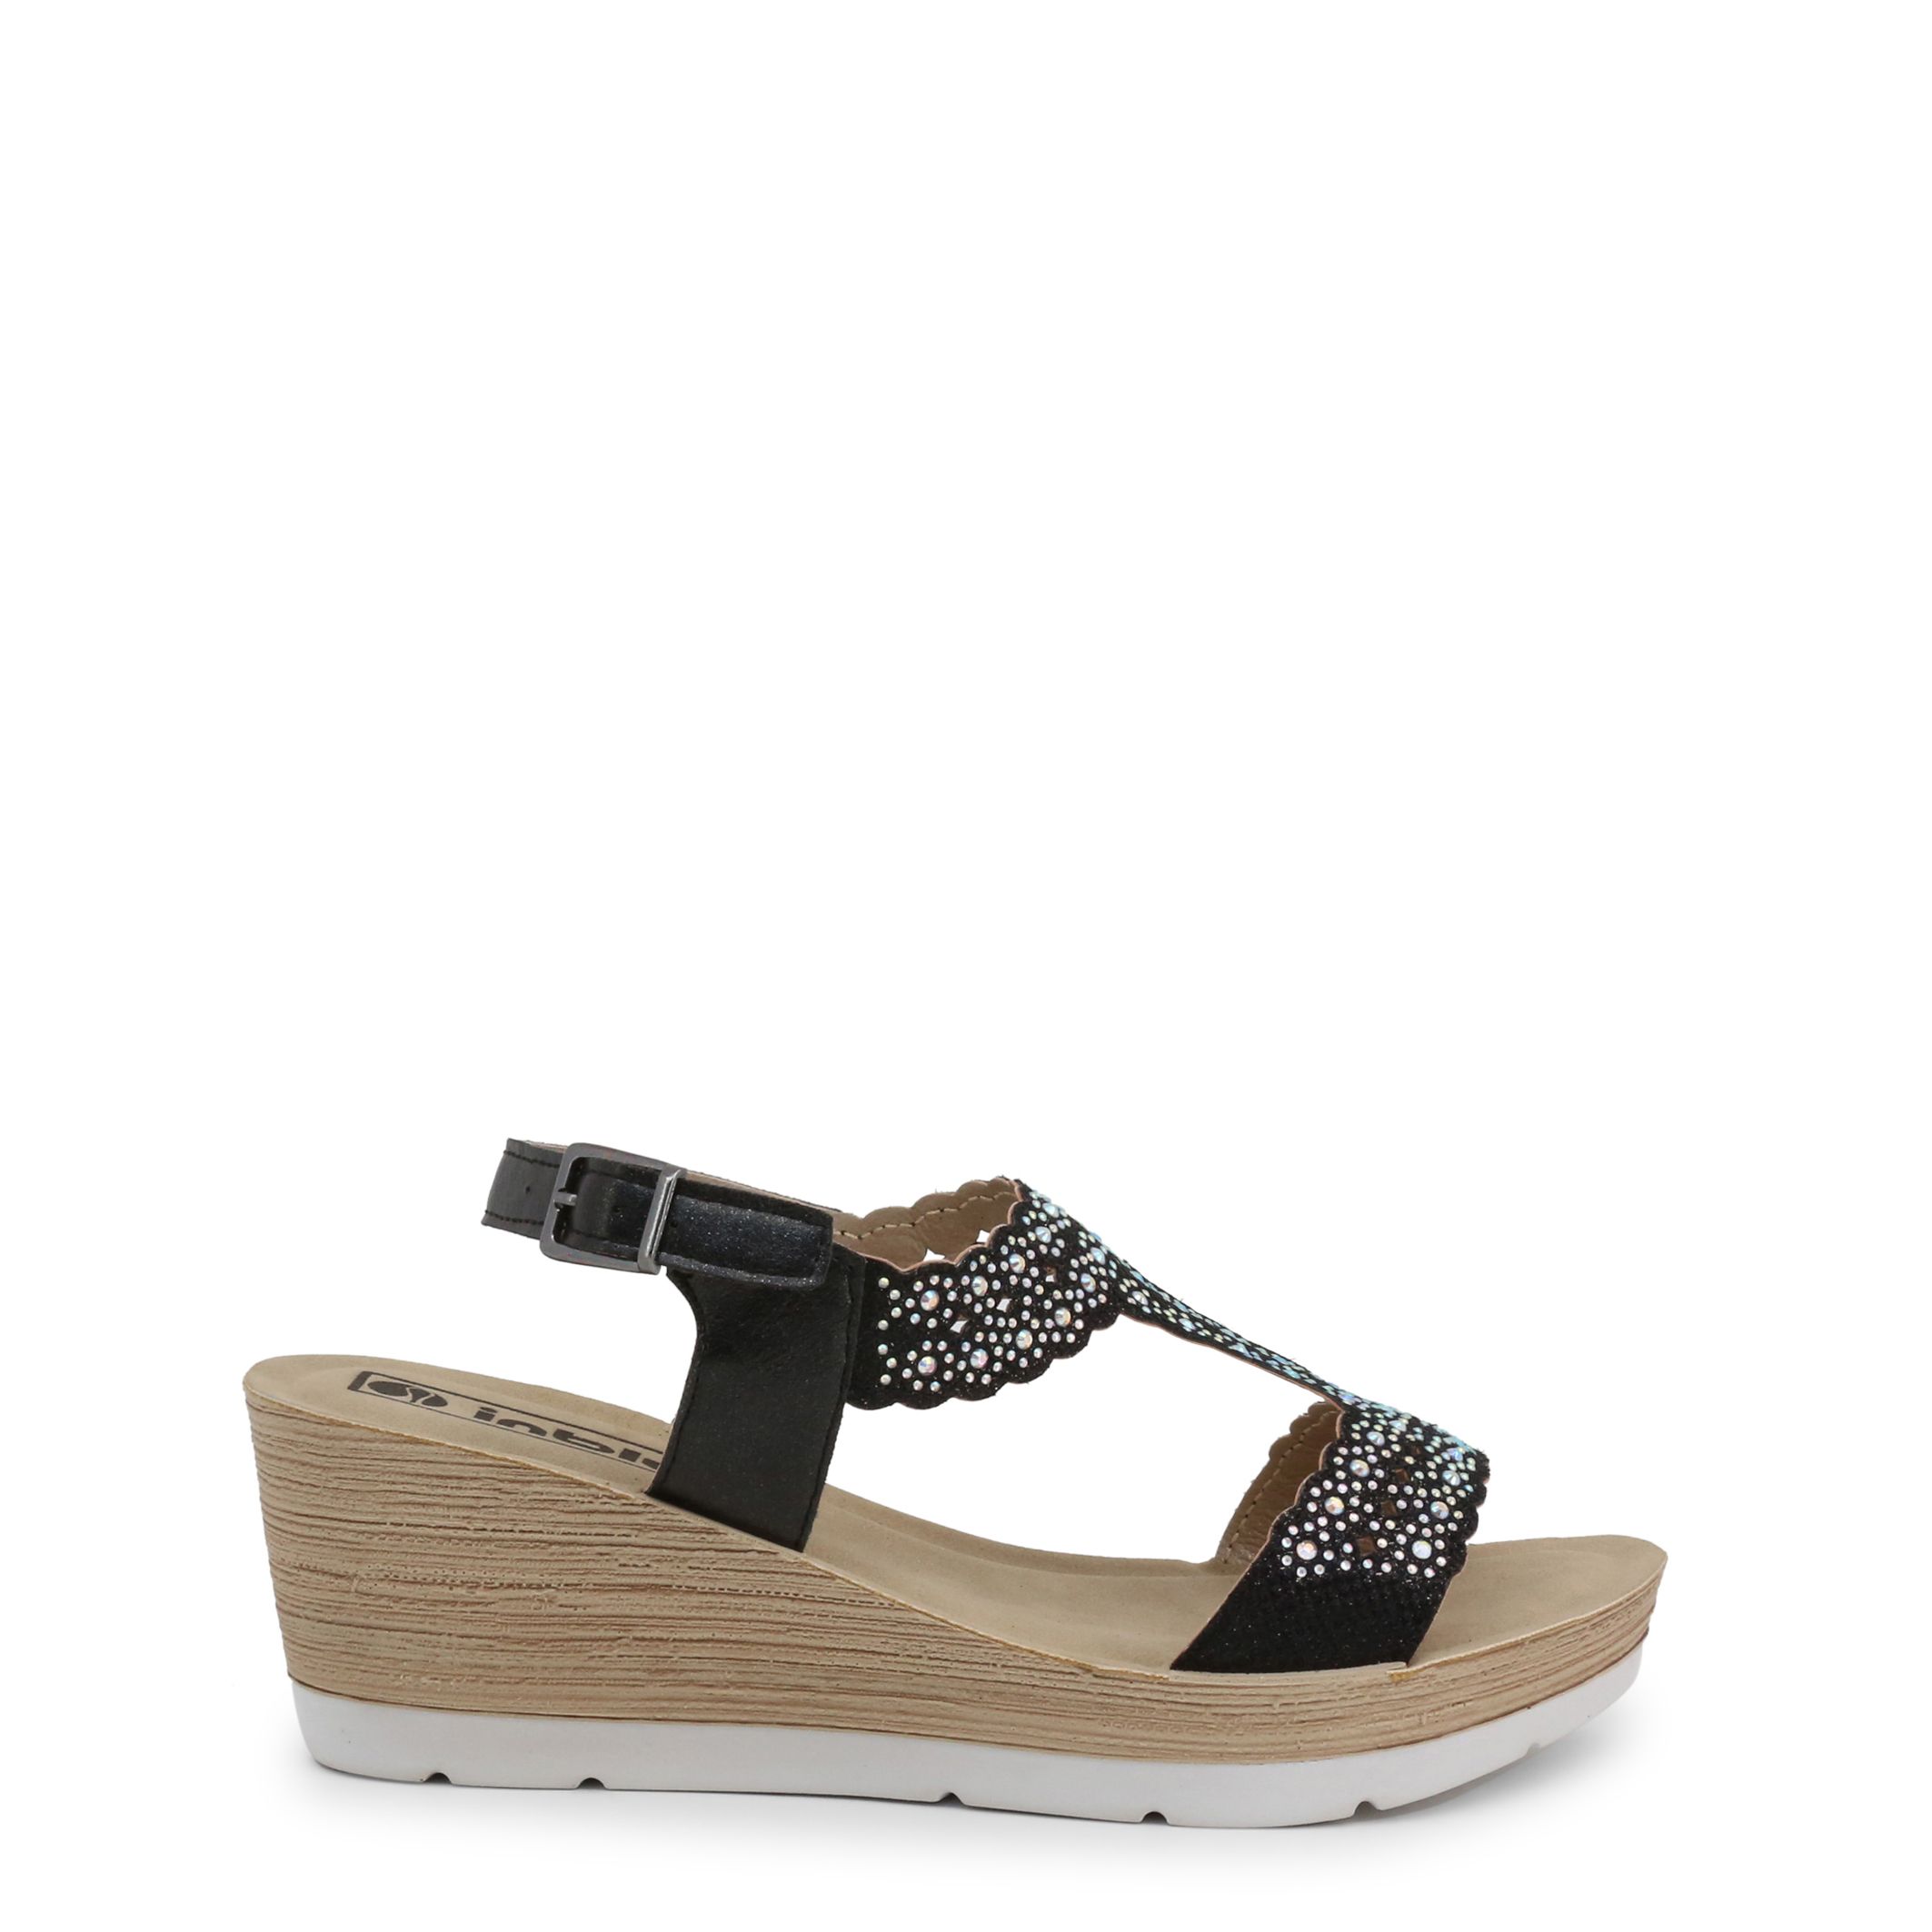 Collection: Spring/Summer <br> Gender: Woman <br> Type: Wedges <br> Upper: fabric <br> Internal lining: synthetic material <br> Sole: rubber <br> Platform height cm: 6 <br> Details: ankle strap, buckle, rhinestones